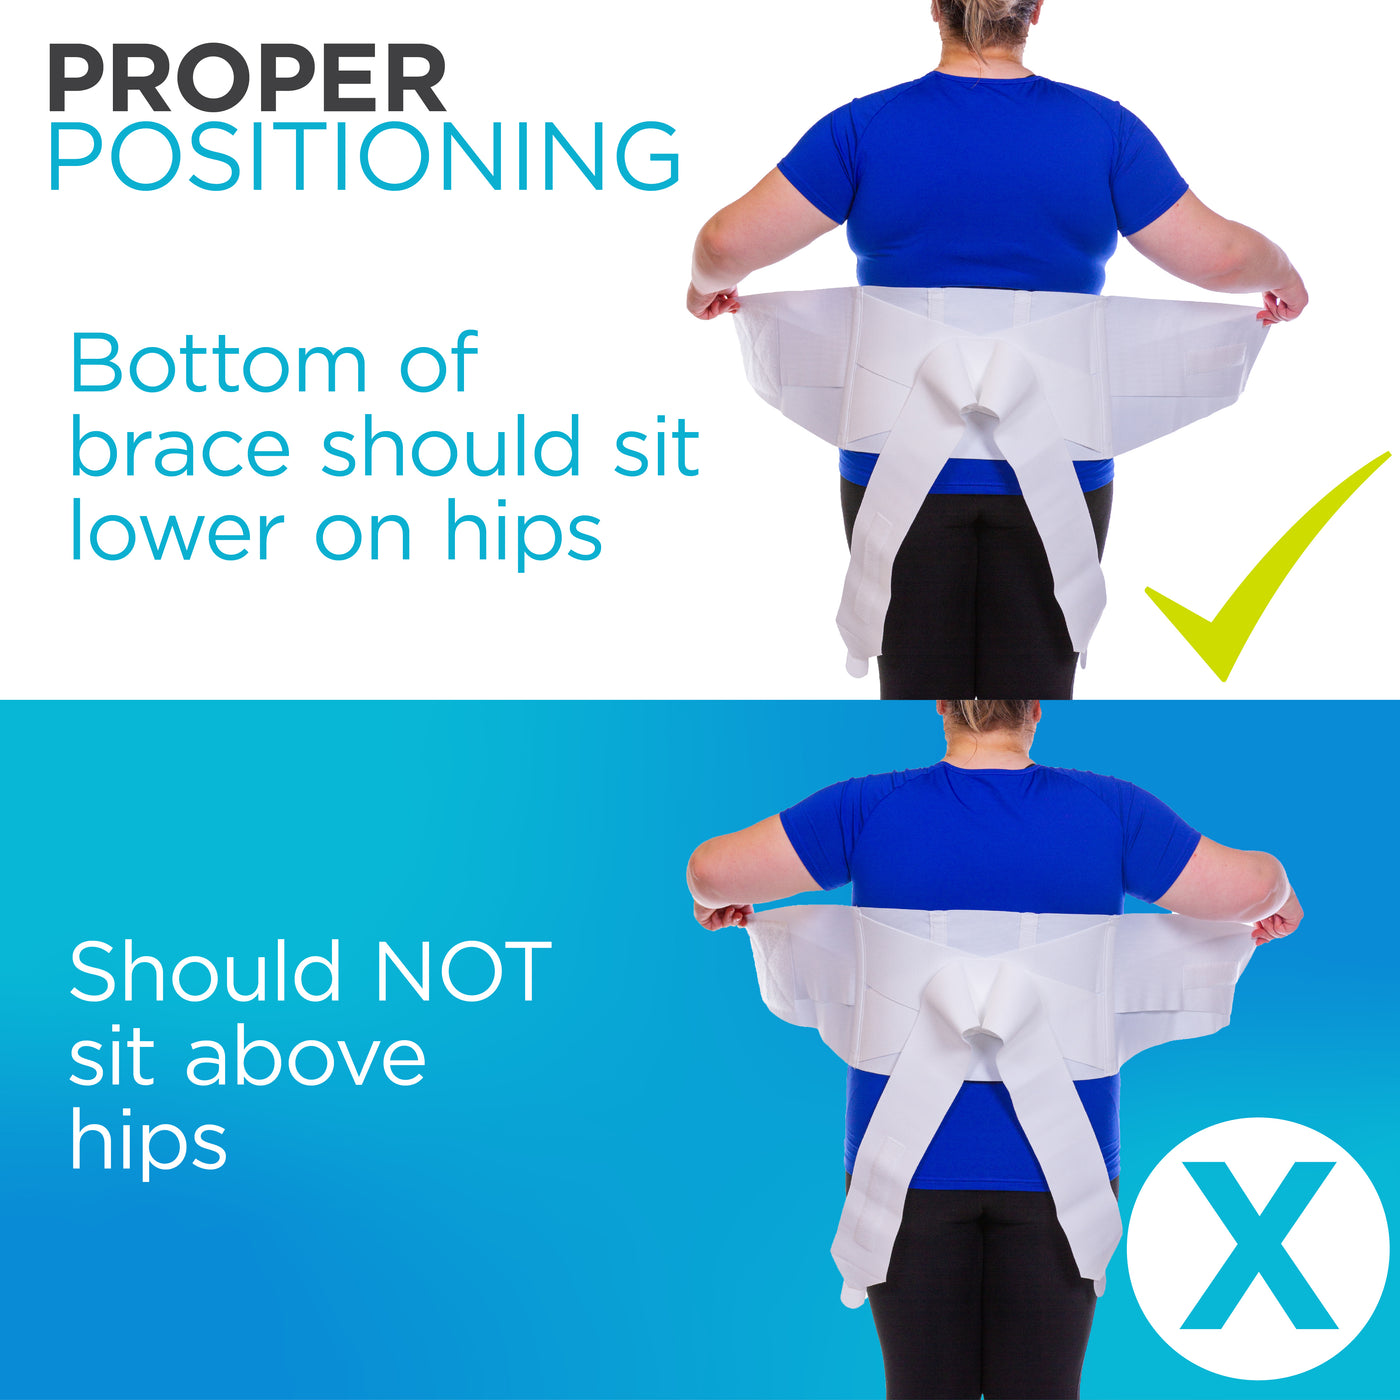 The obesity support belt should sit lower on the hips, not around waist